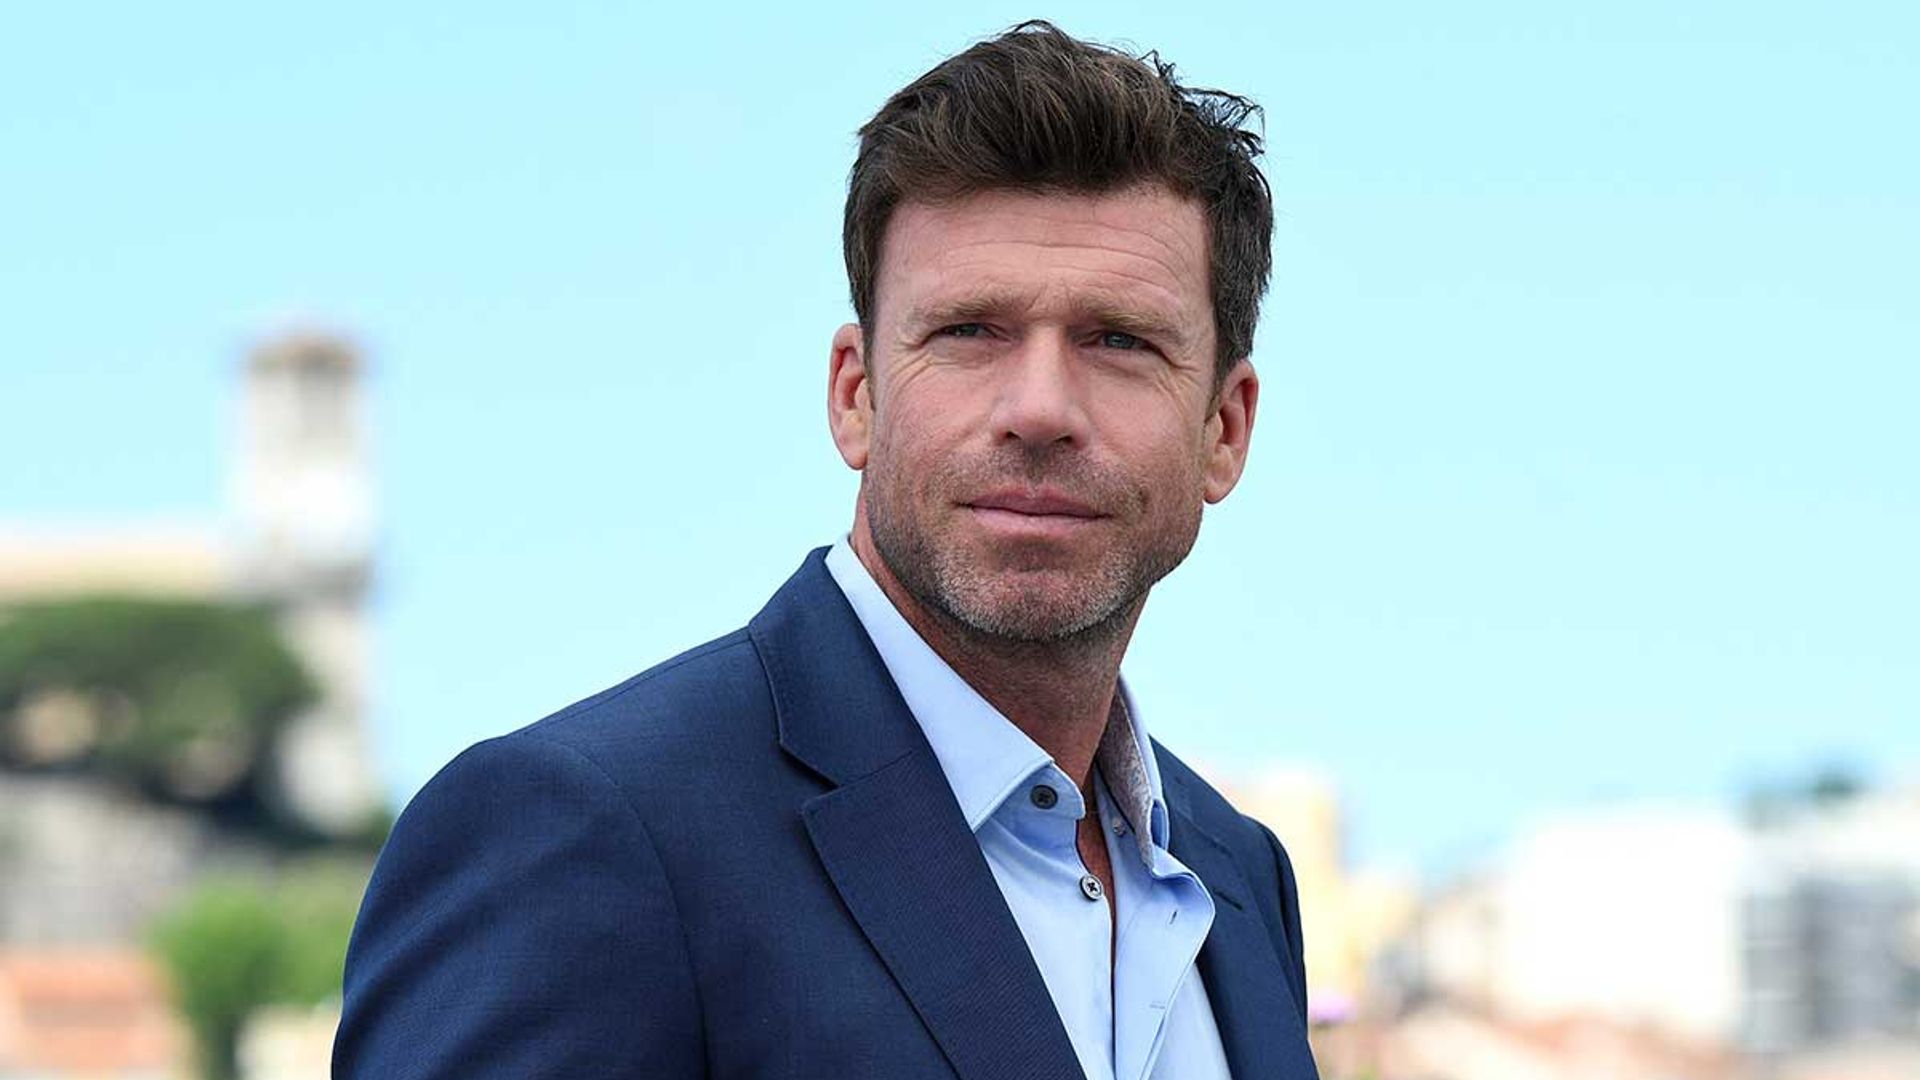 Yellowstone creator Taylor Sheridan opens up about decision to quit TV show